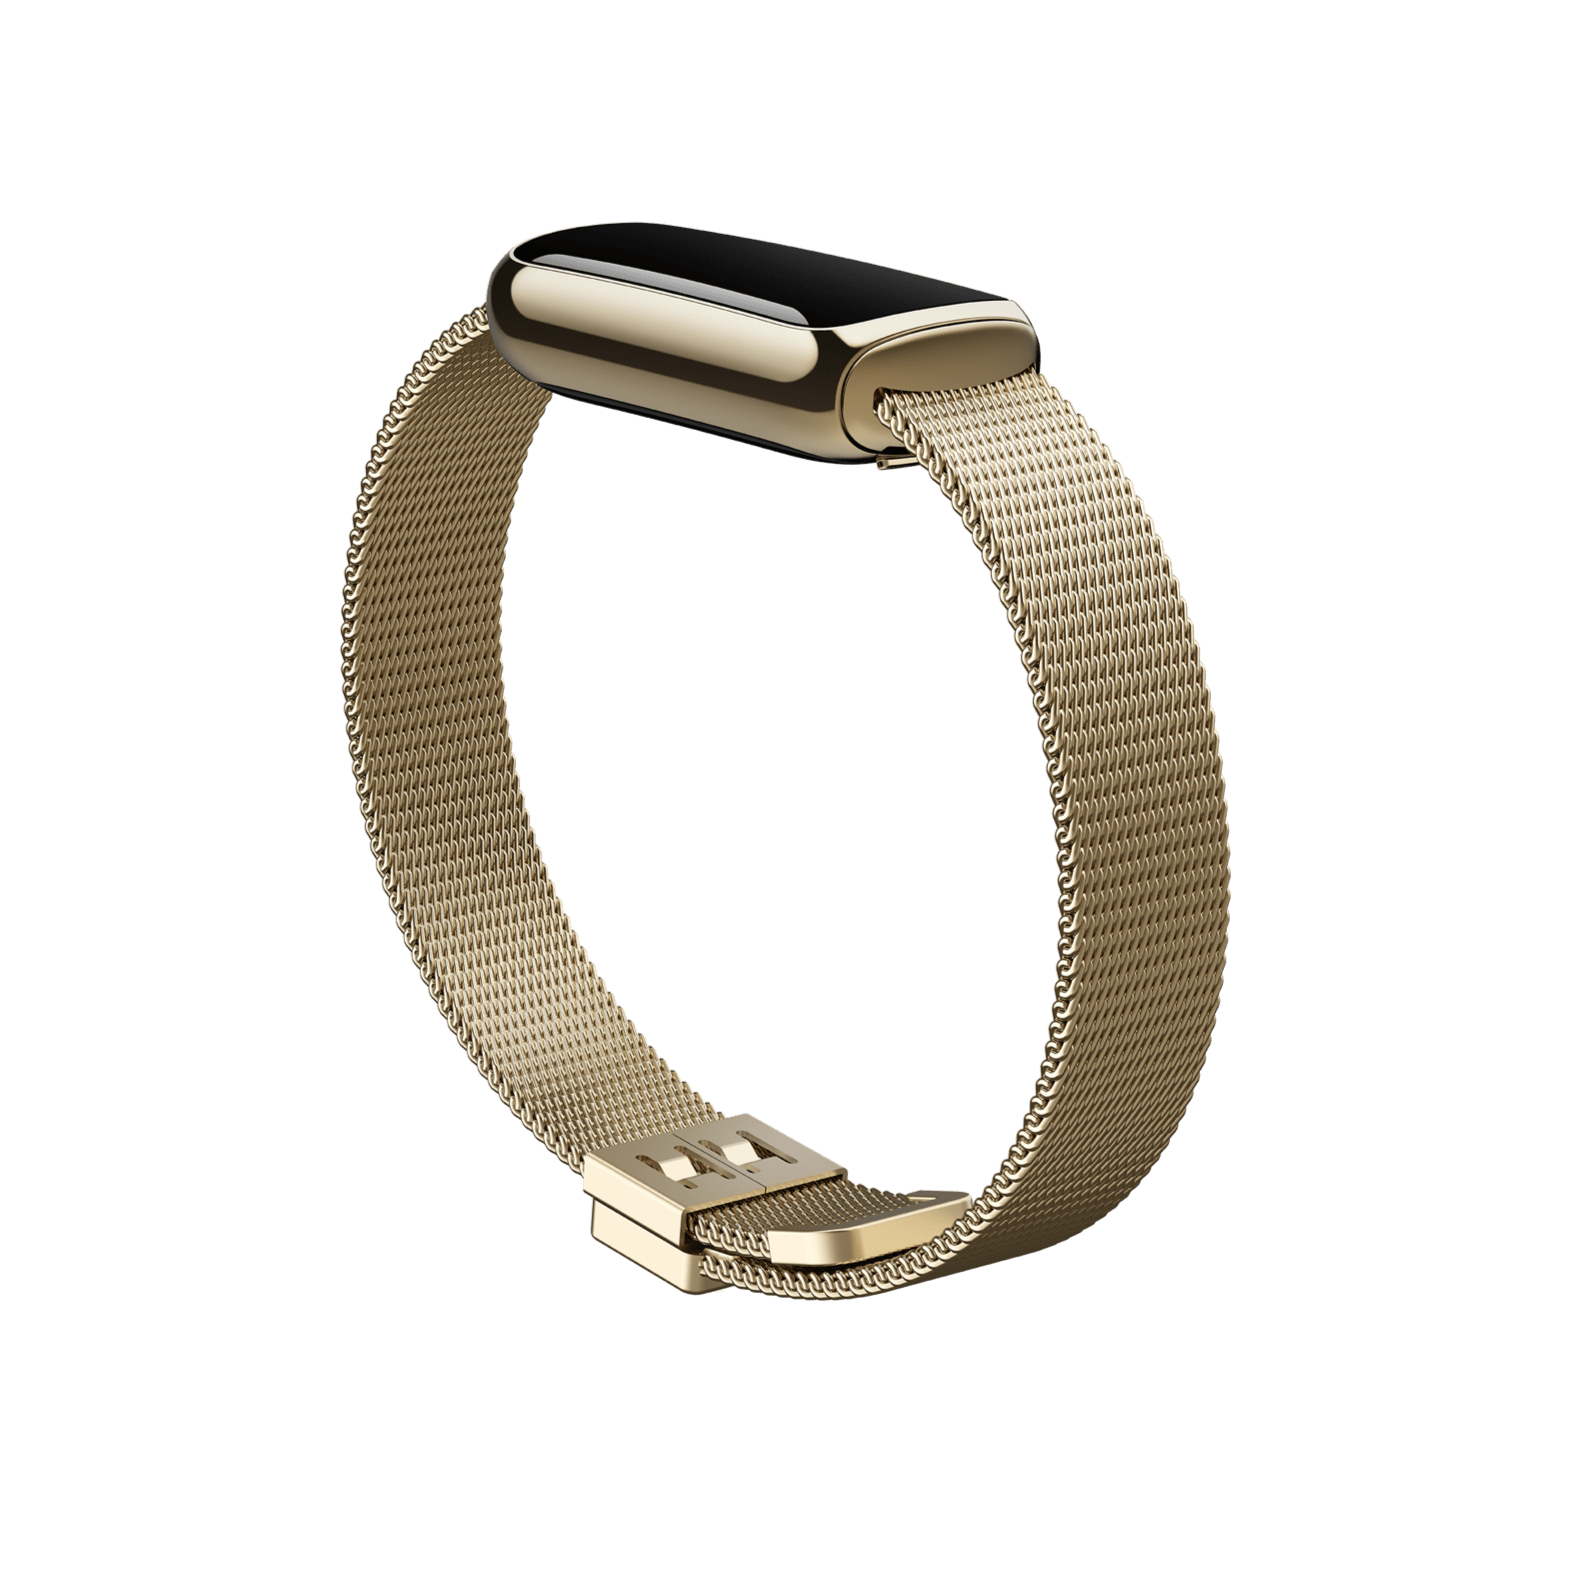 Buy cheap Fitbit Luxe straps ? - 123watches